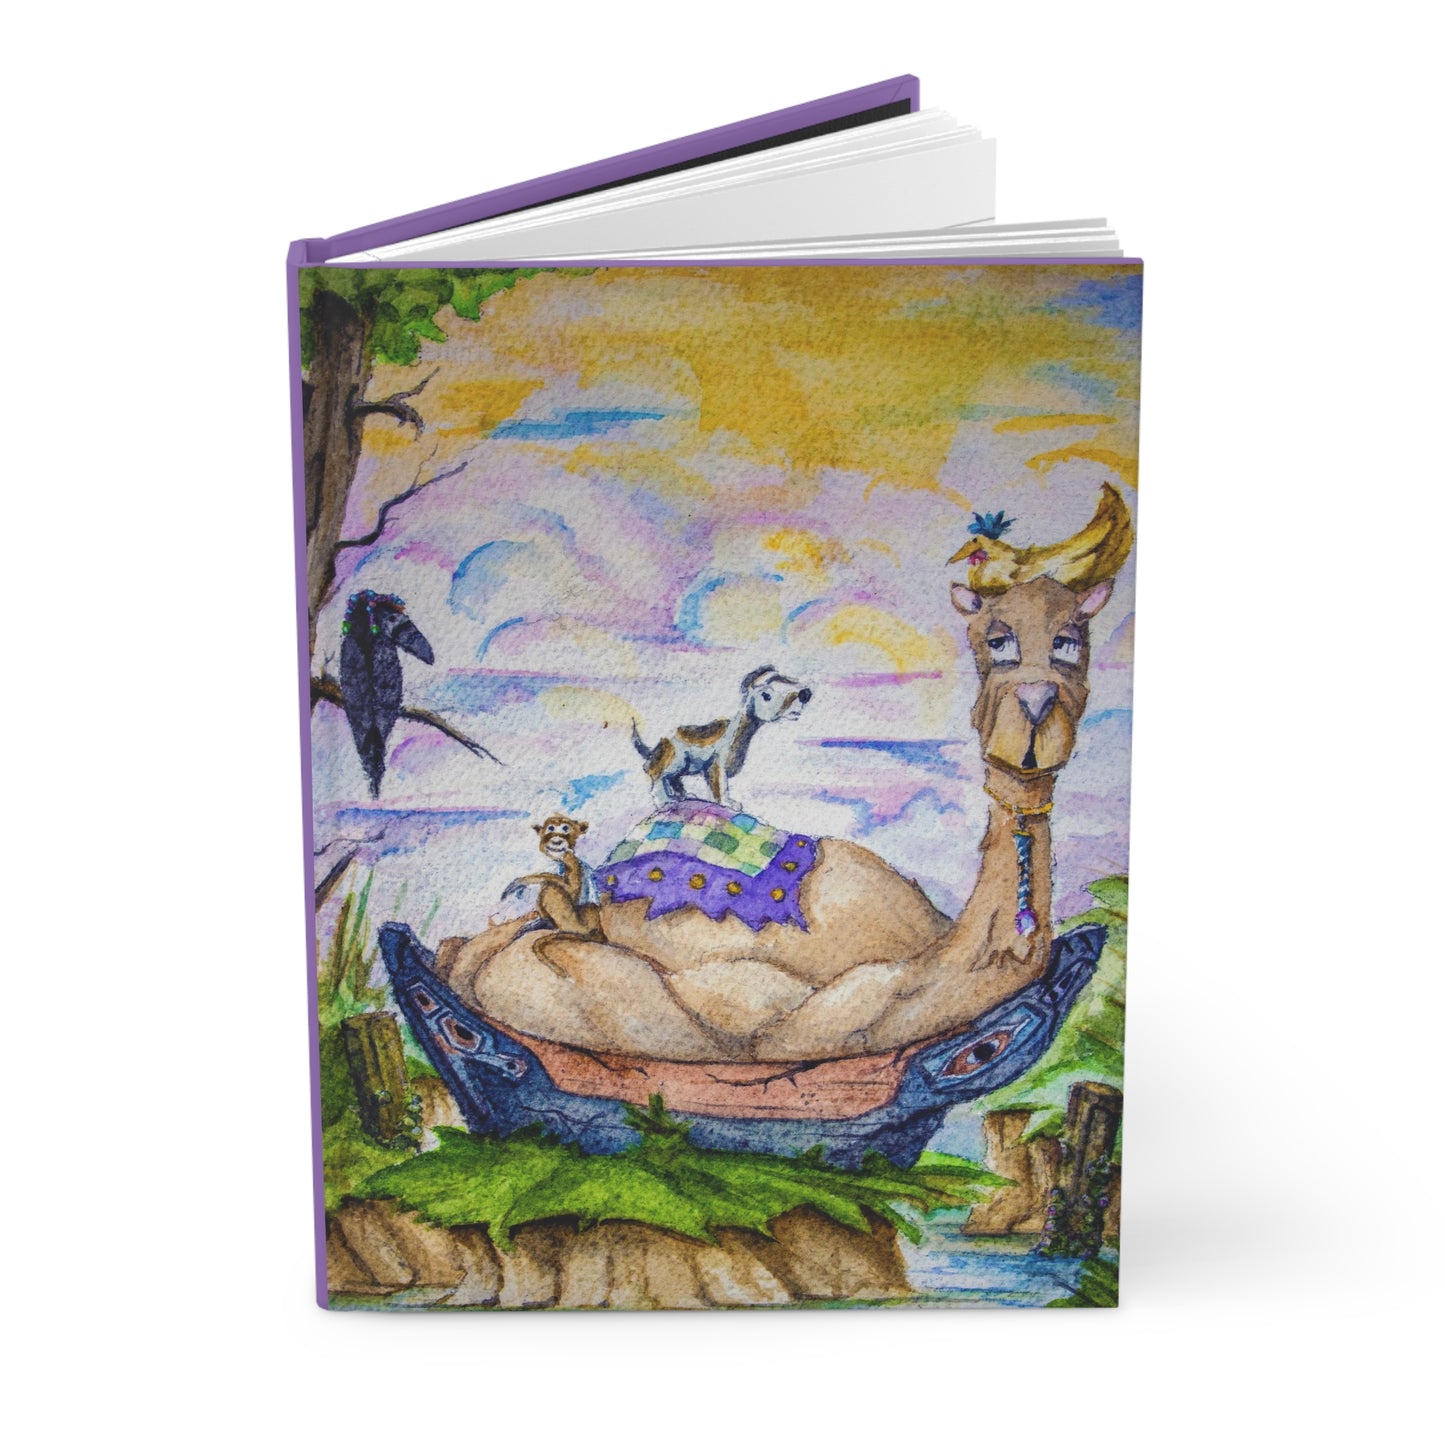 The View - The Chicken Has the Best Spot - Unique Artistic Design, Notebook for Creative Writings, 150 lined pages, Hardcover Matte Journal